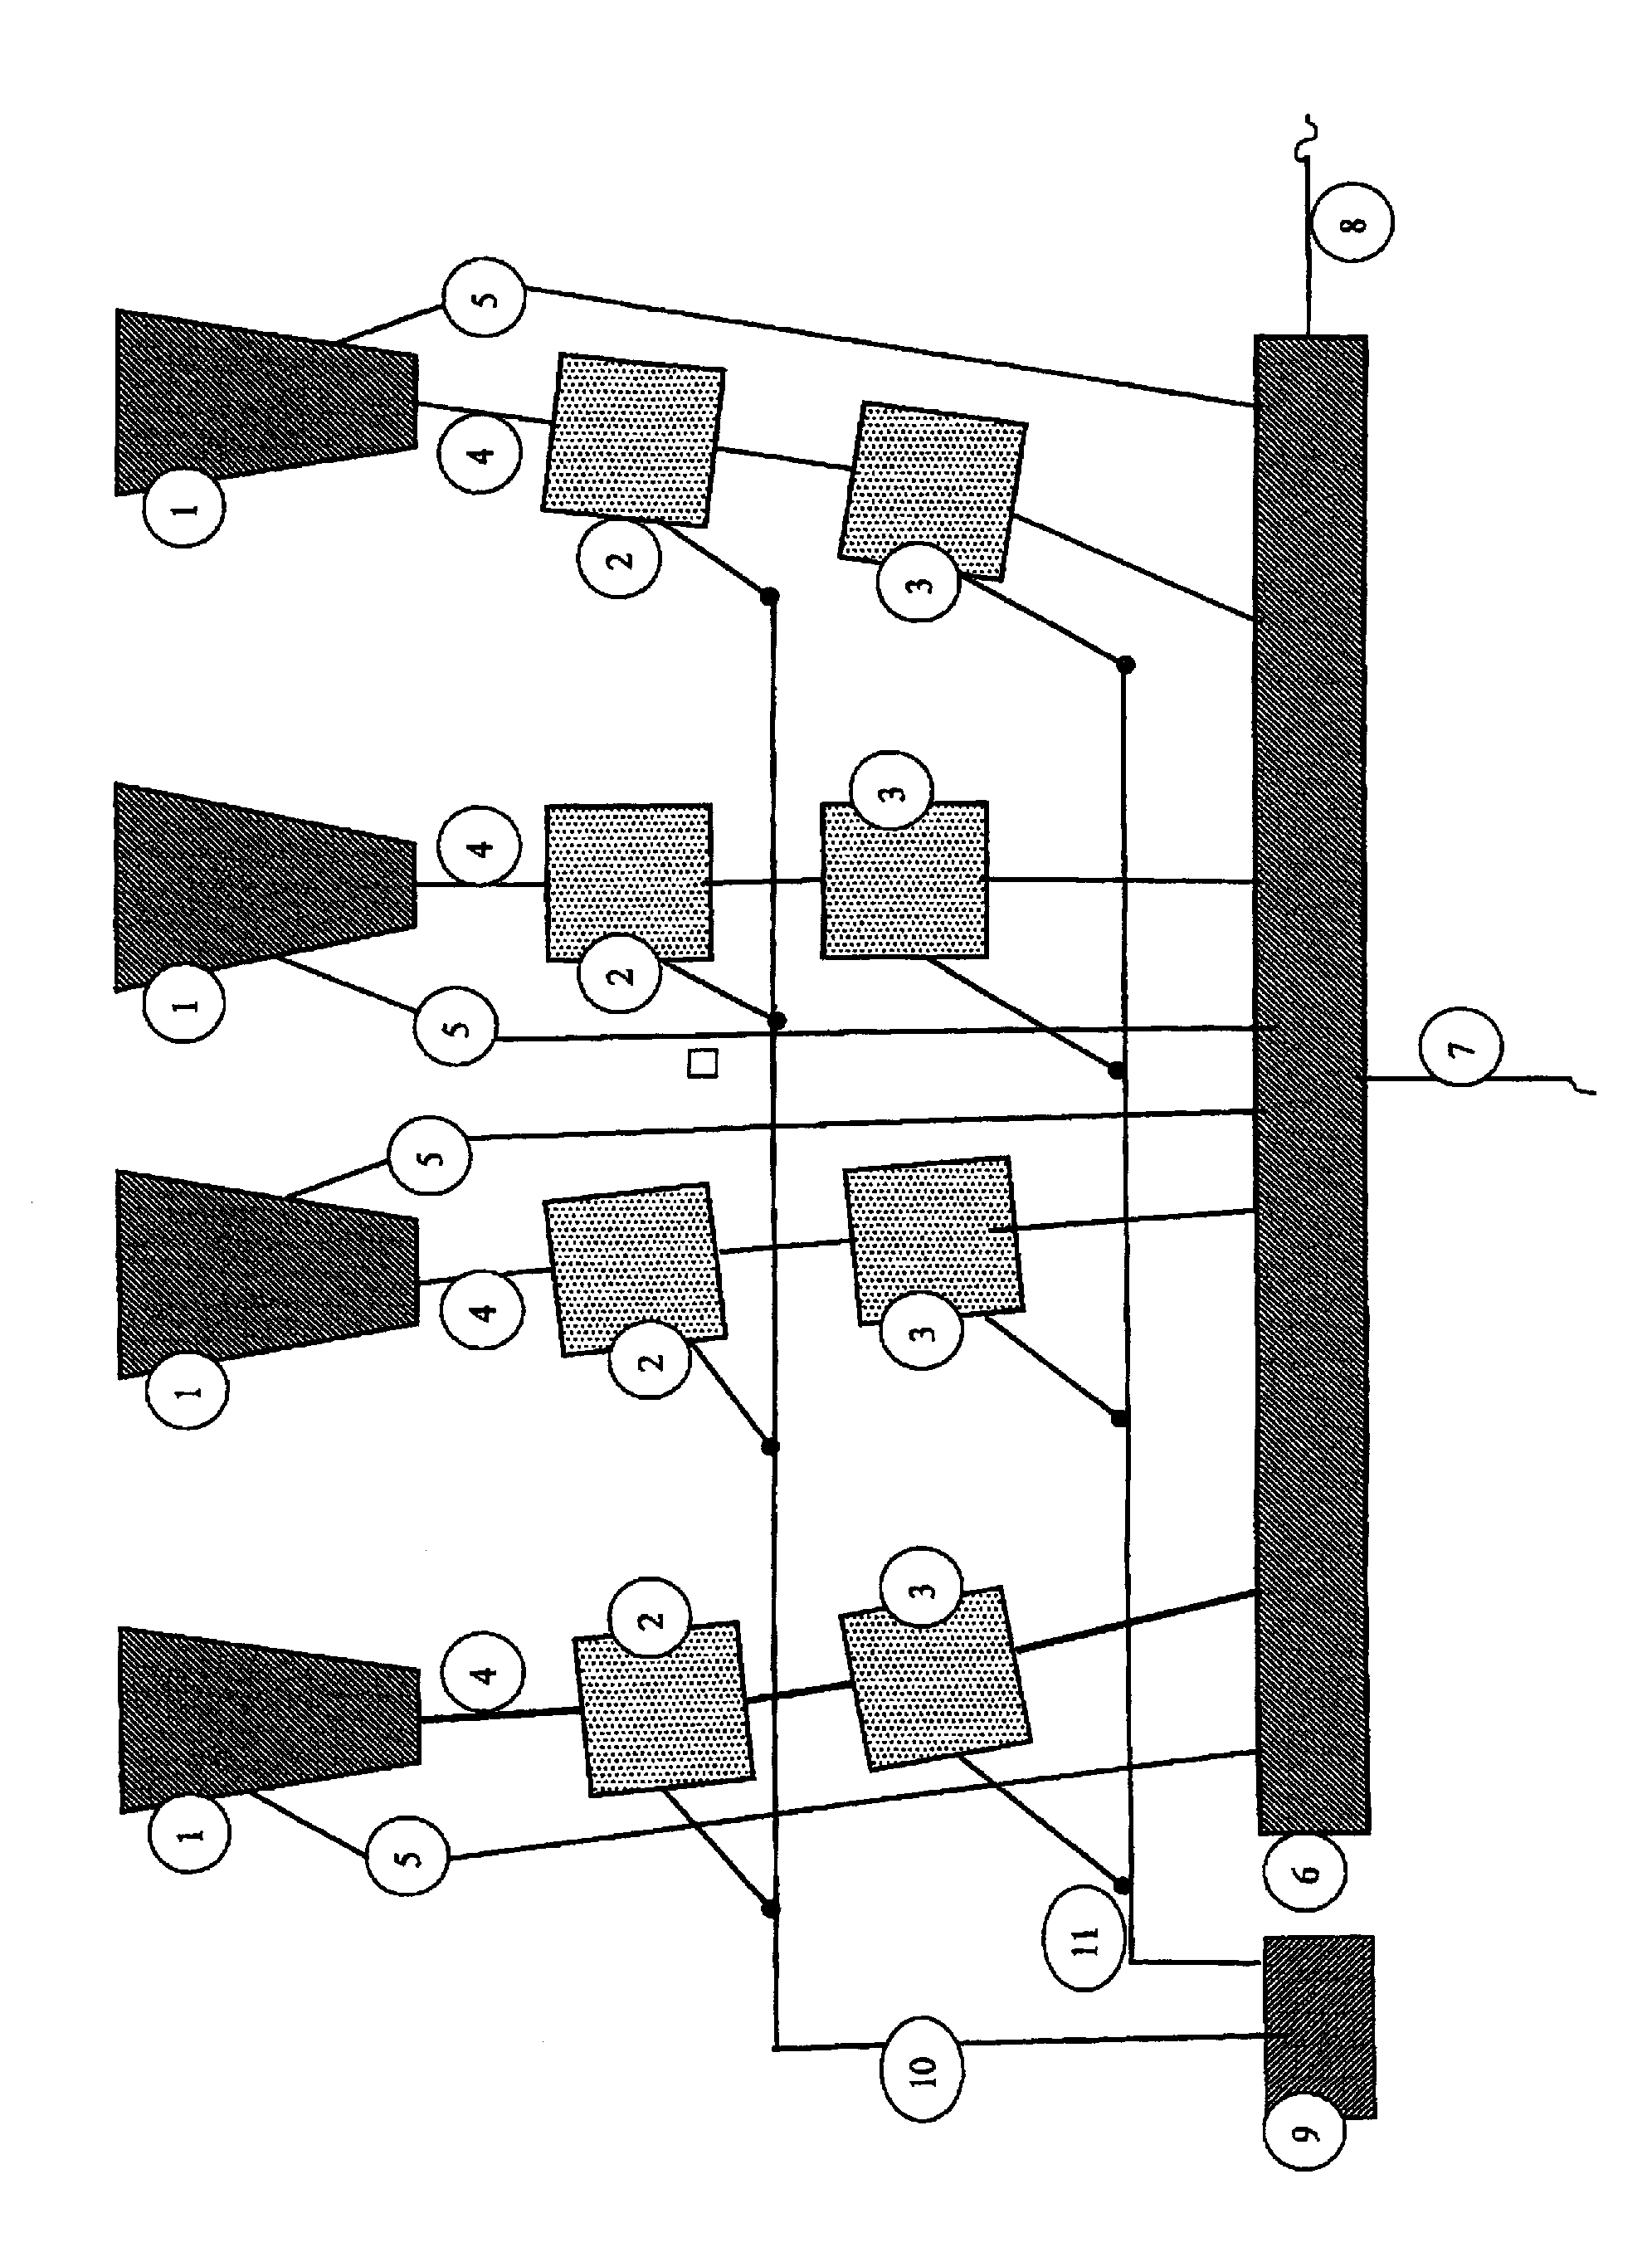 Milking system for mammals, preferably cattle, that differentiates when the milk is over, comprising a collector, teat cups and hoses